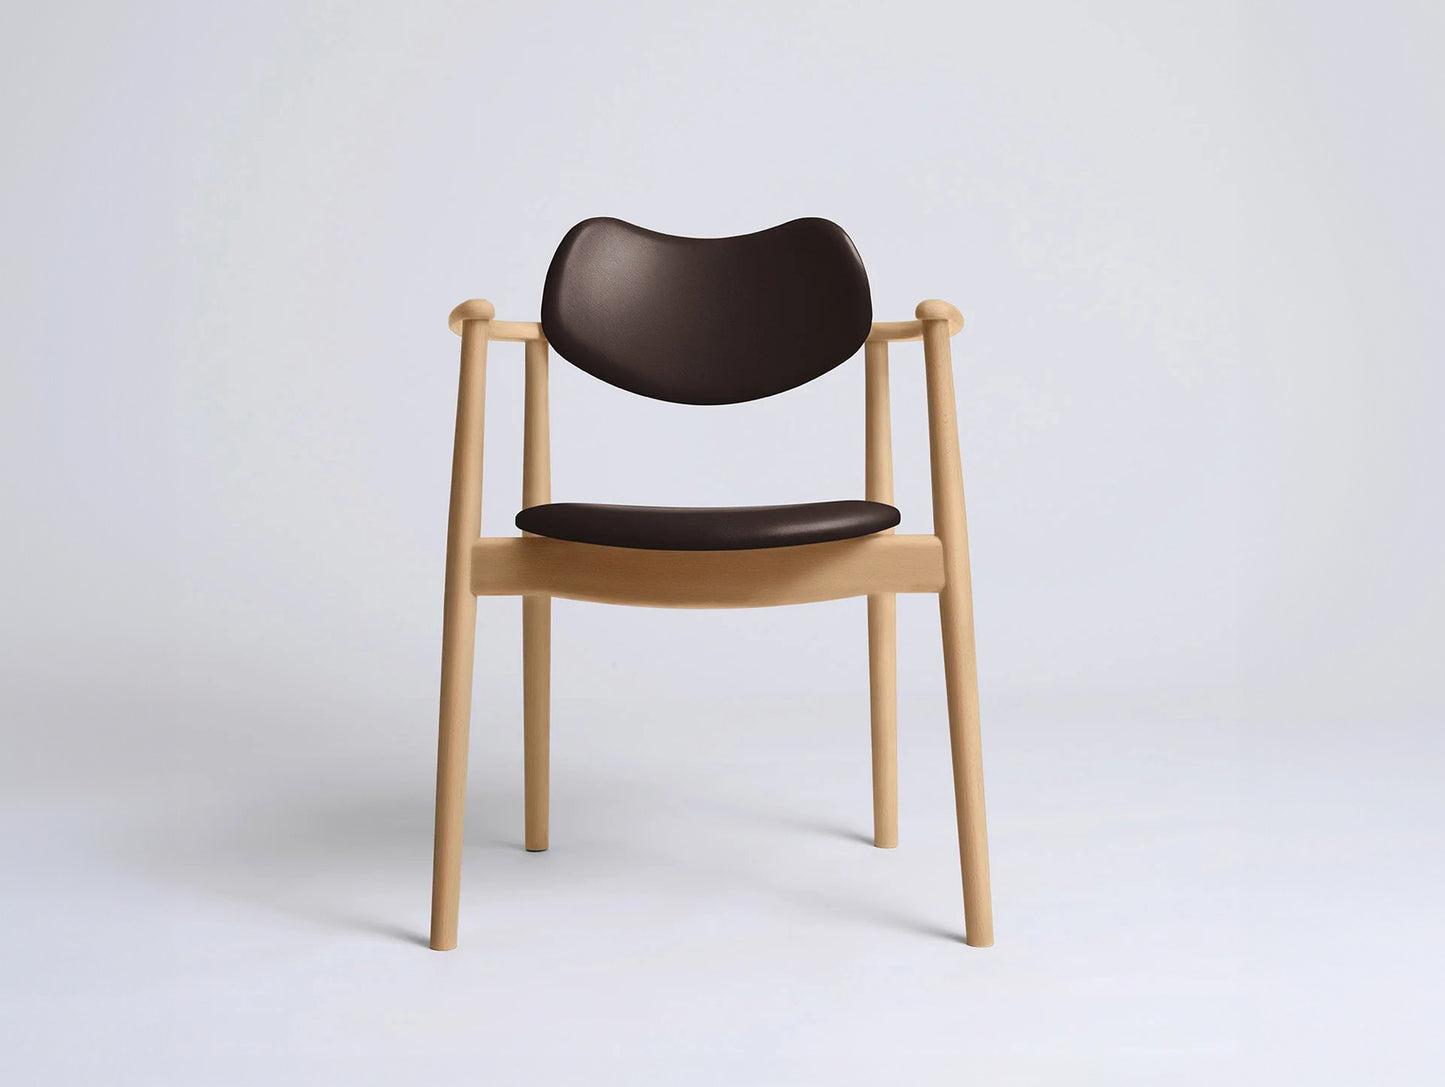 Regatta Chair Seat and Back Upholstered by Ro Collection - Oiled Beech / Exclusive Rio Chocolate Brown Leather